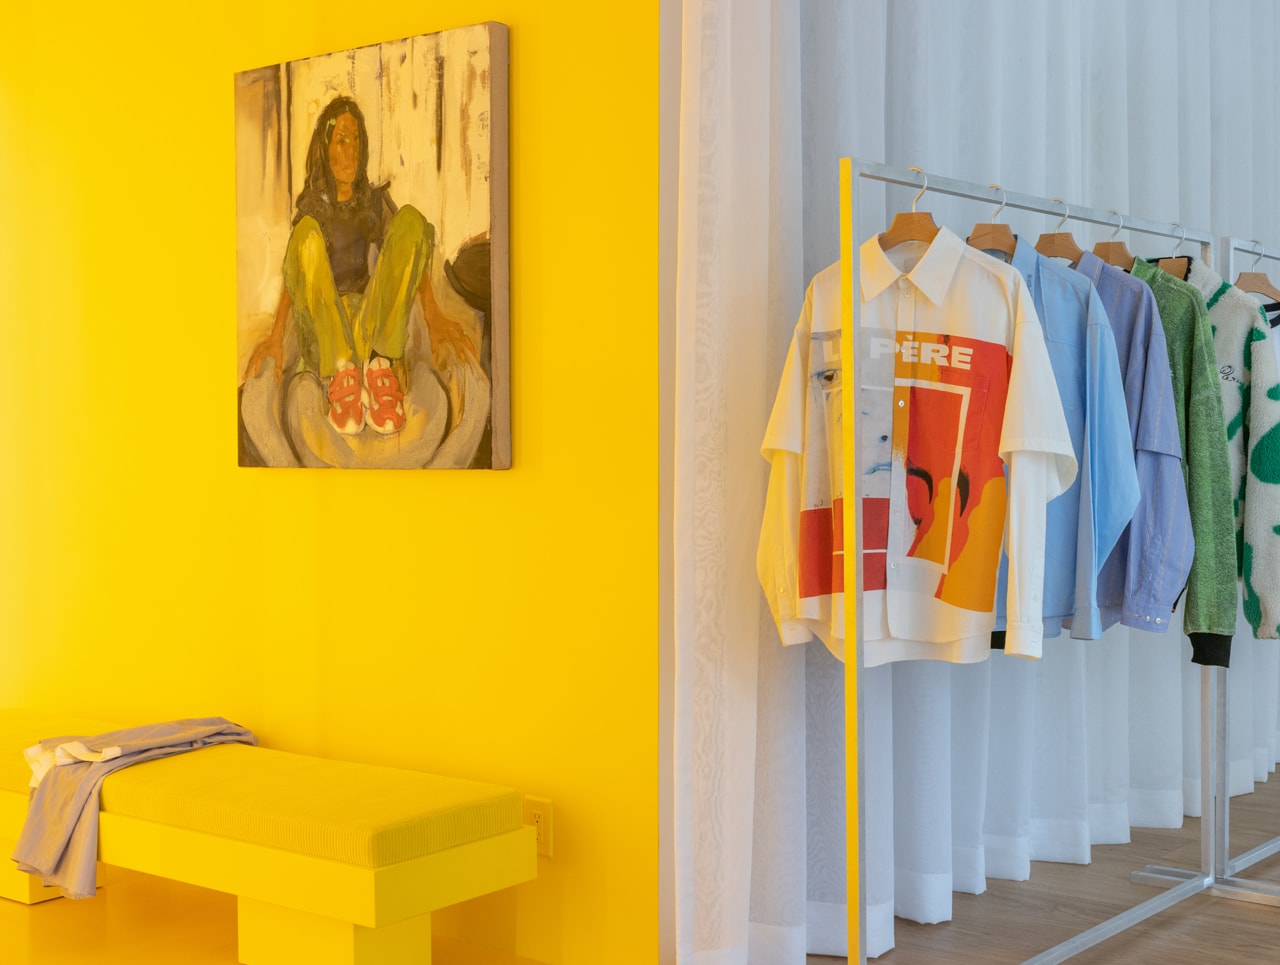 le PÈRE Opens Debut Flagship Store in NYC Fashion